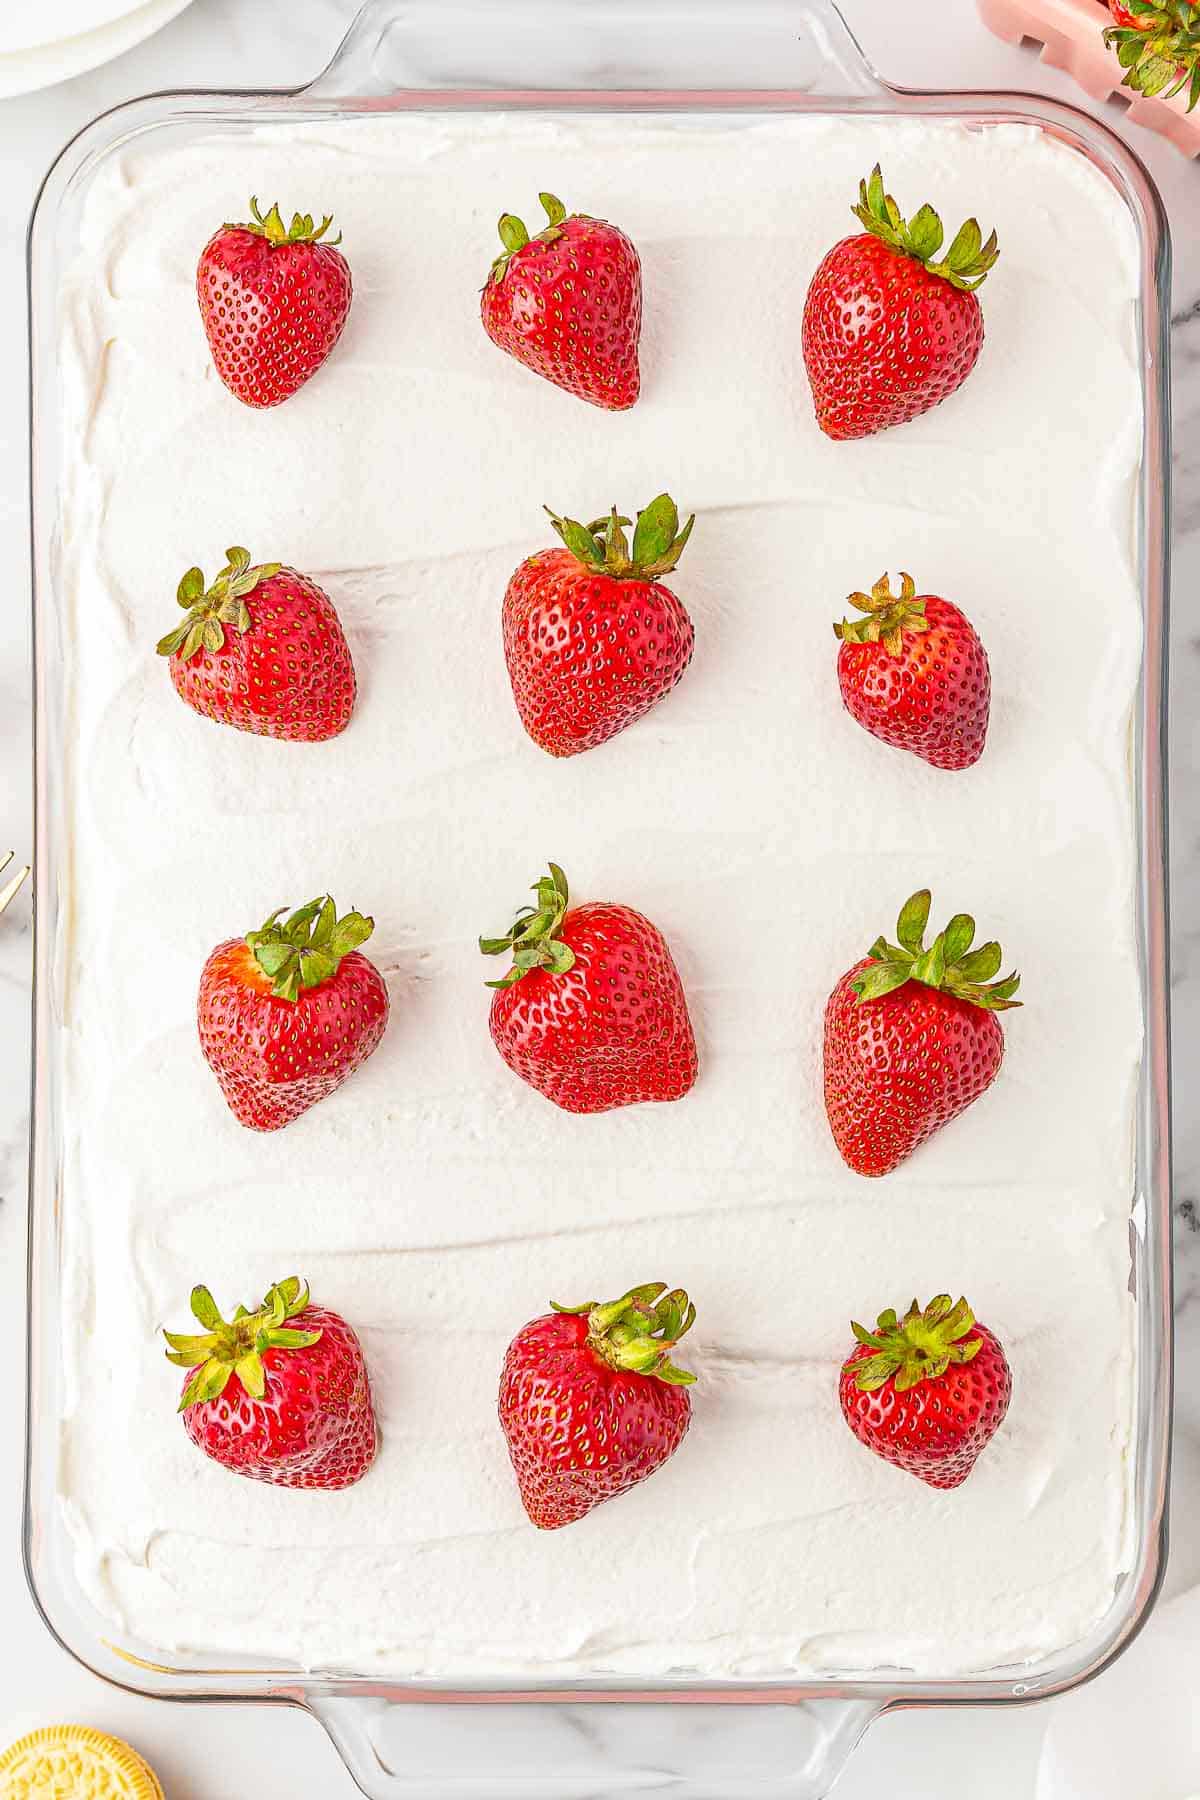 Strawberry delight in baking dish topped with whole strawberry.